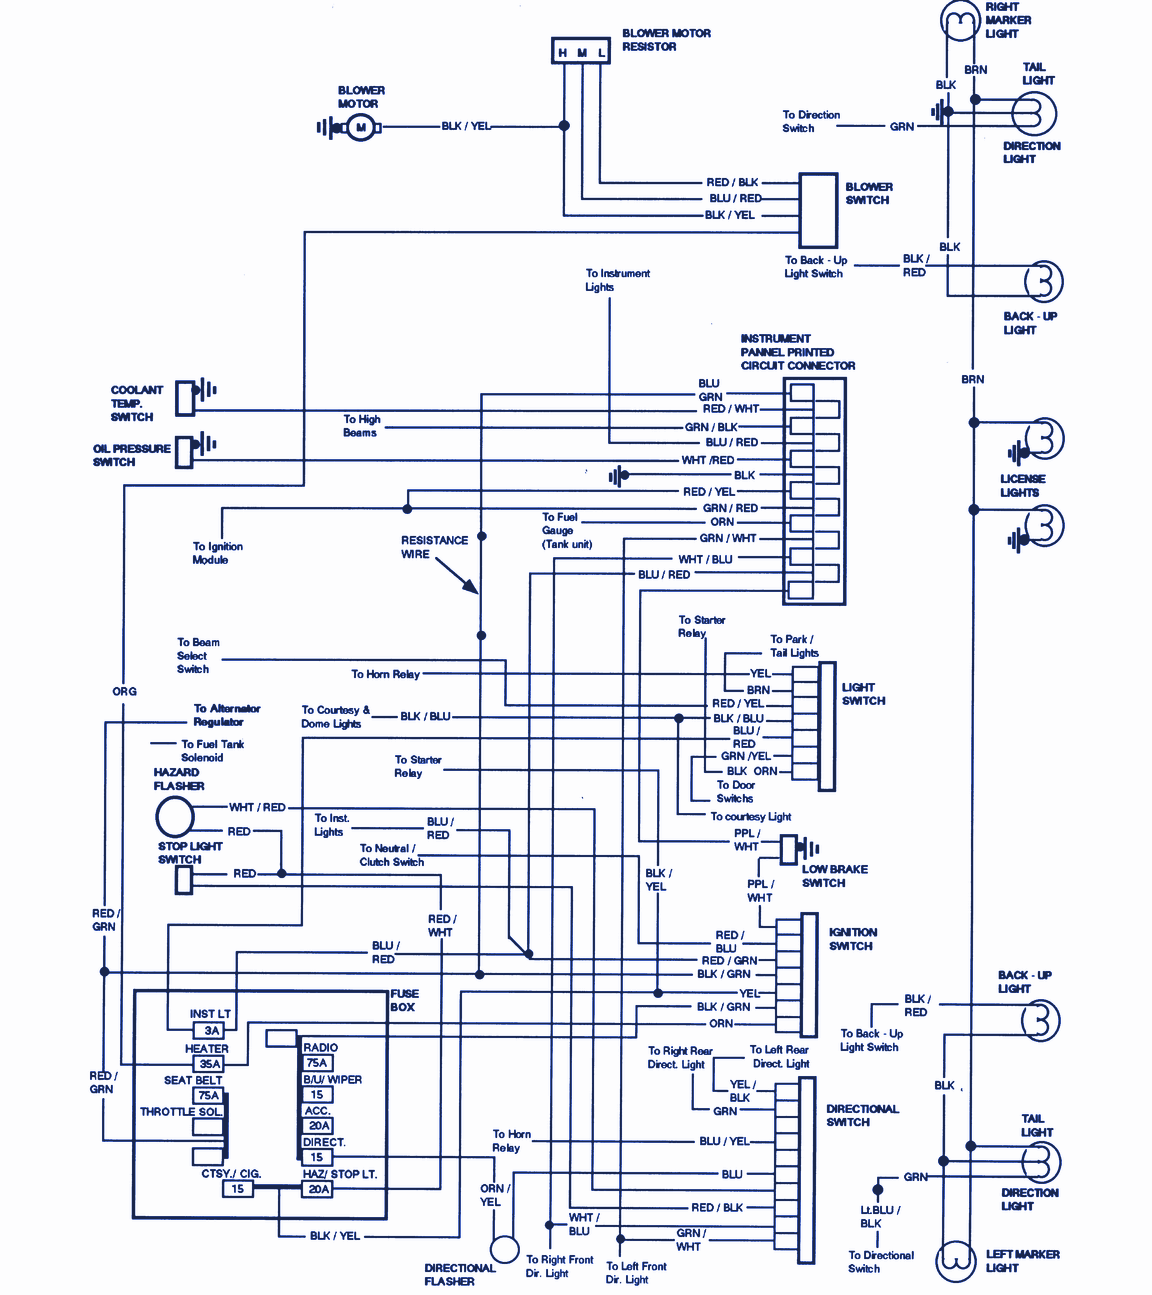 Wiring diagram for 1983 ford bronco #1